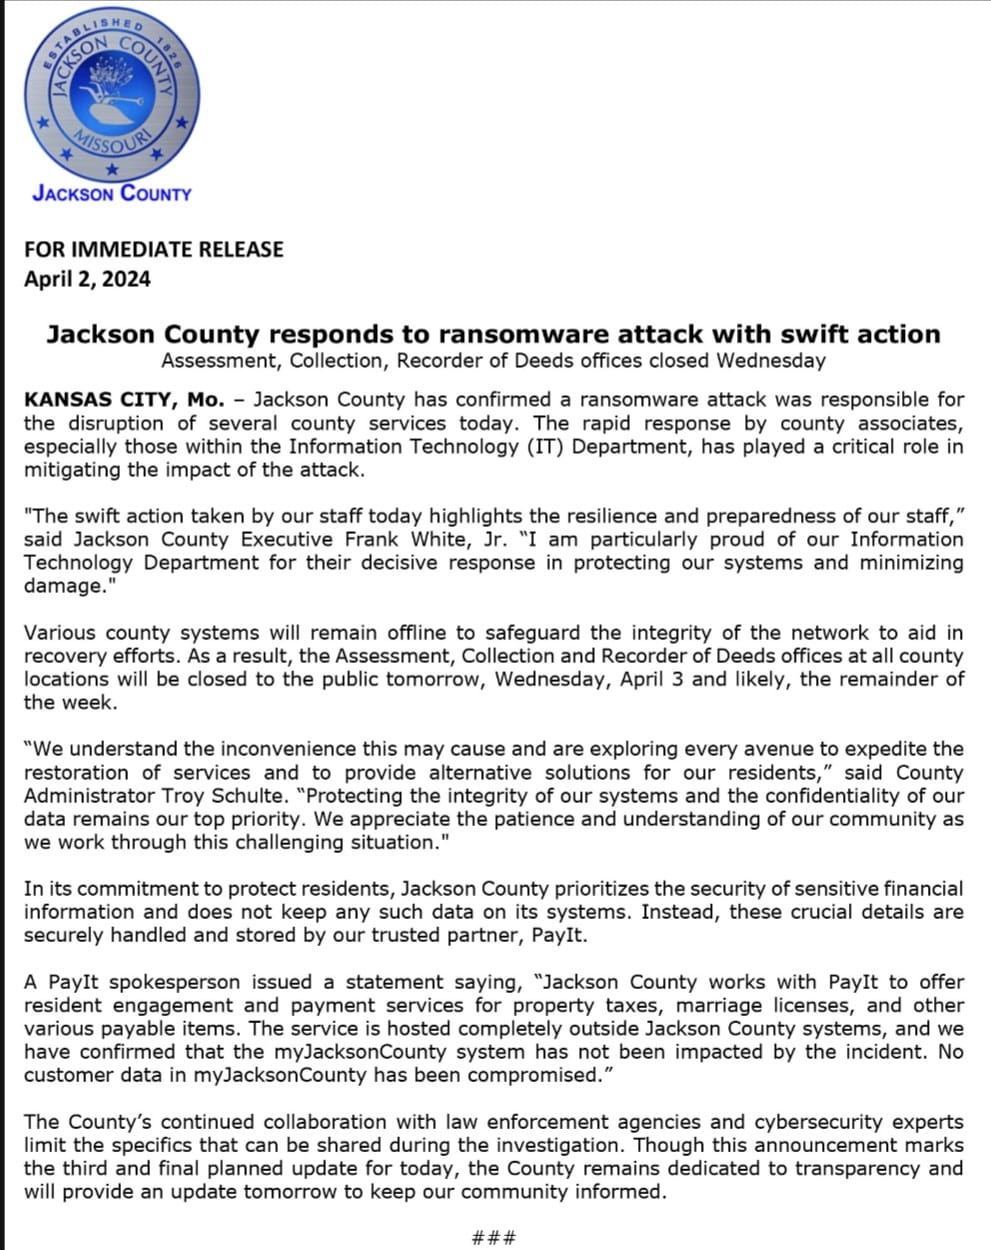 Statement on the cyberattack from Jackson County officials